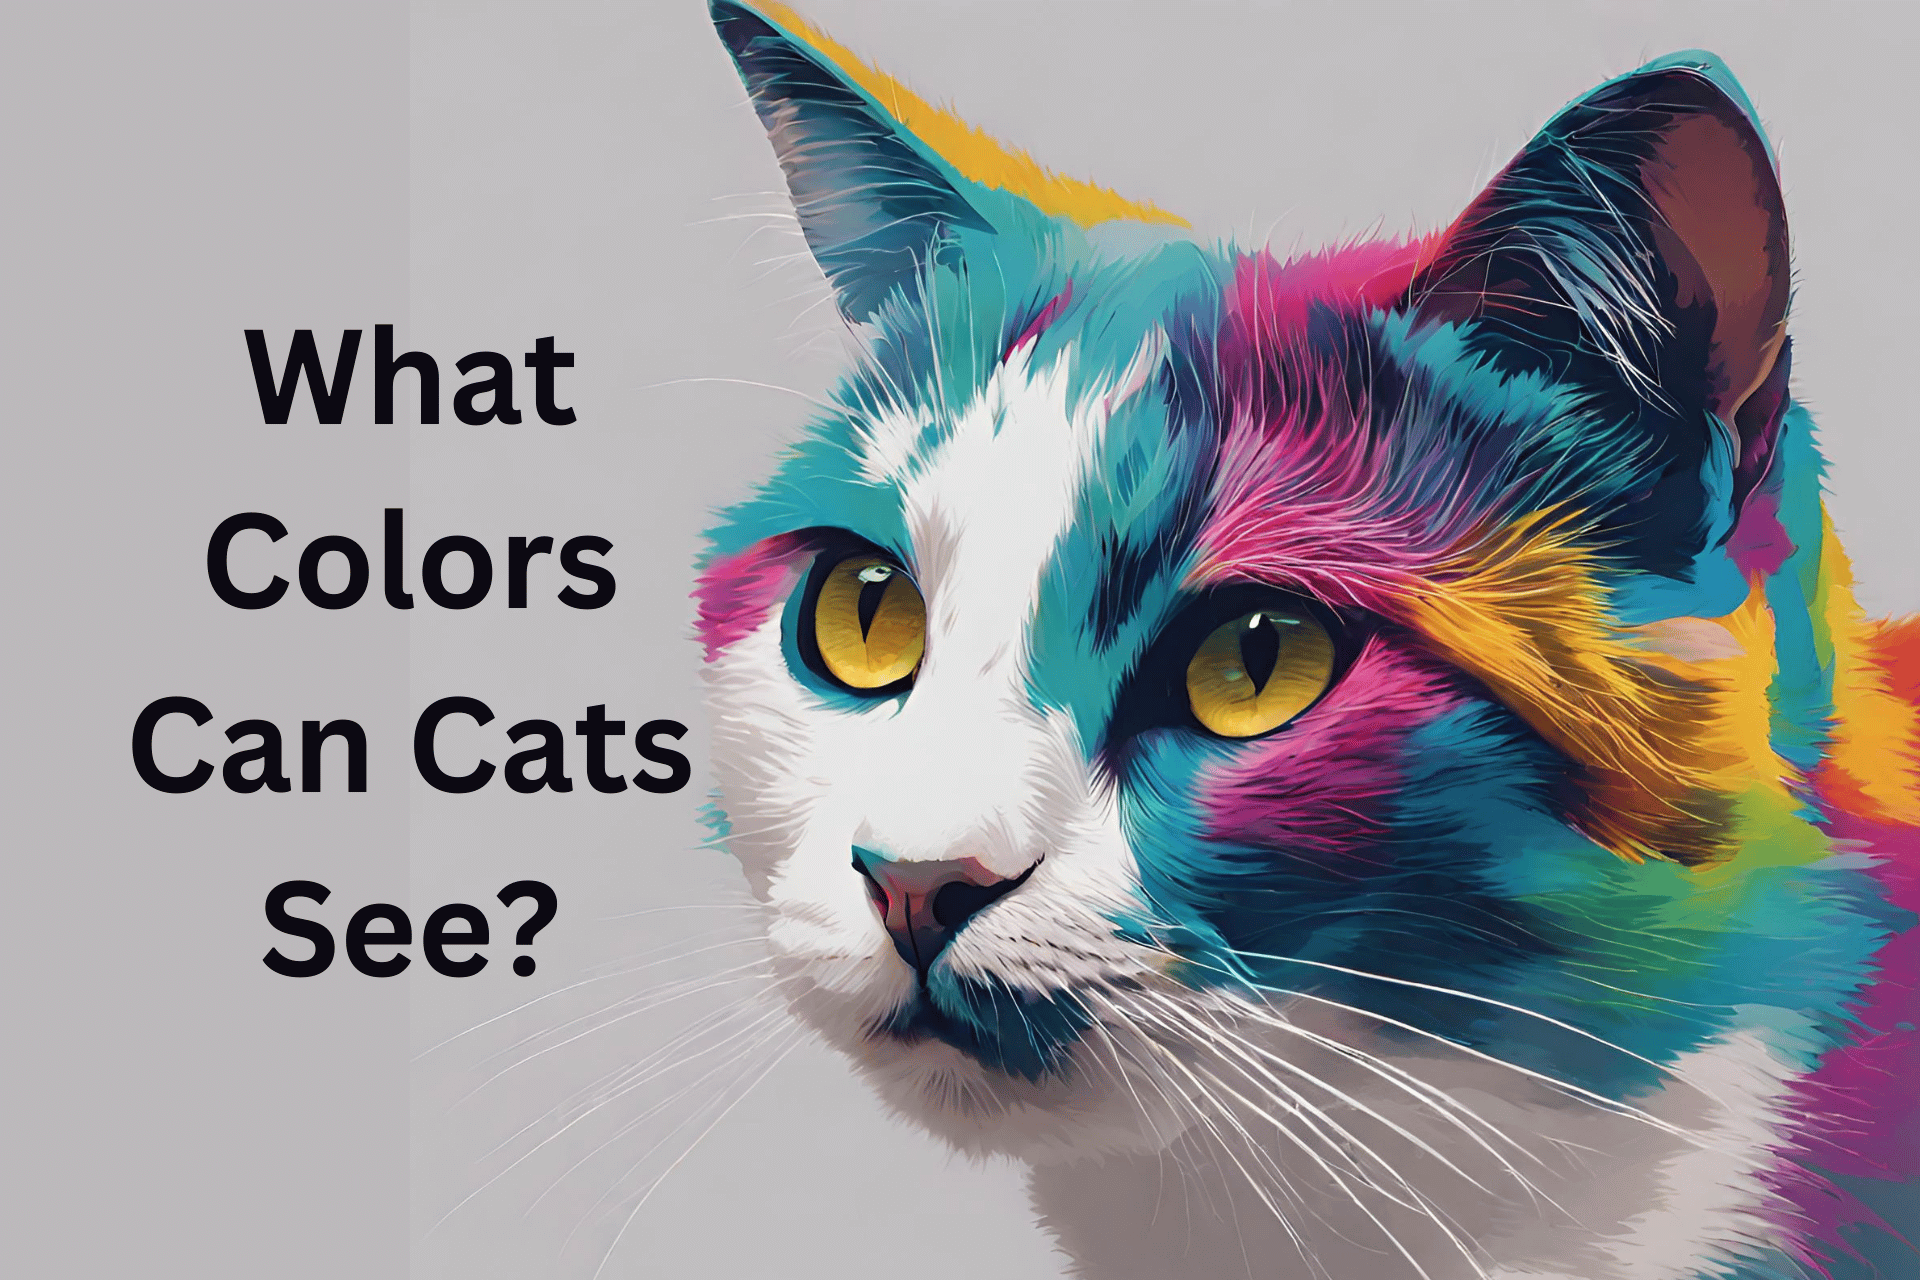 What Colors Can Cats See